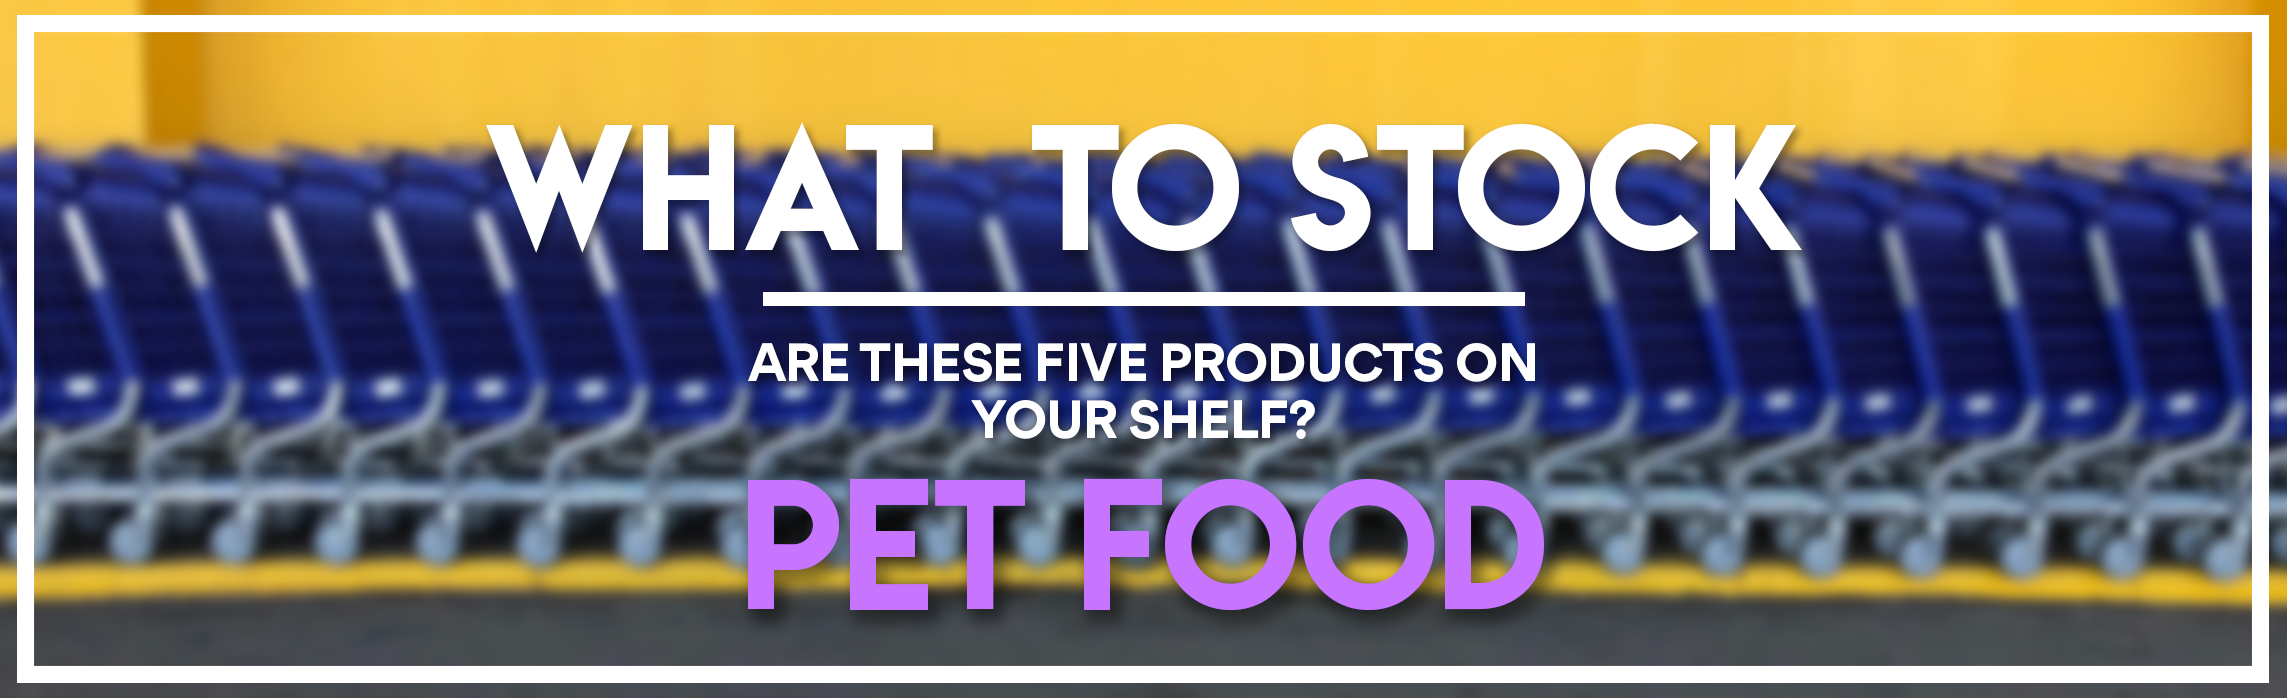 WHAT TO STOCK - PET FOOD